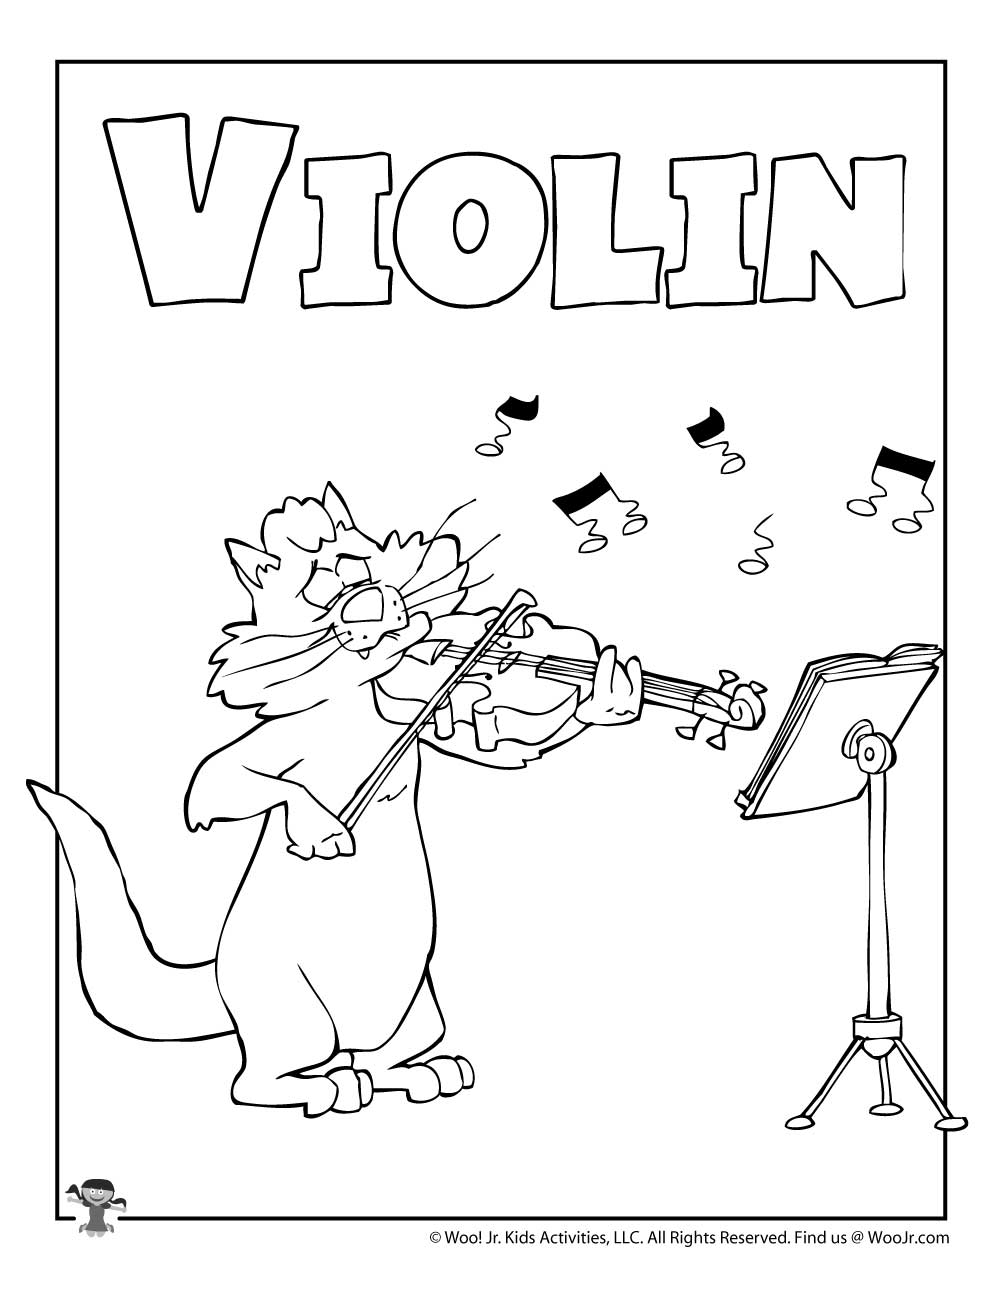 V is for Violin Coloring Page | Woo! Jr. Kids Activities